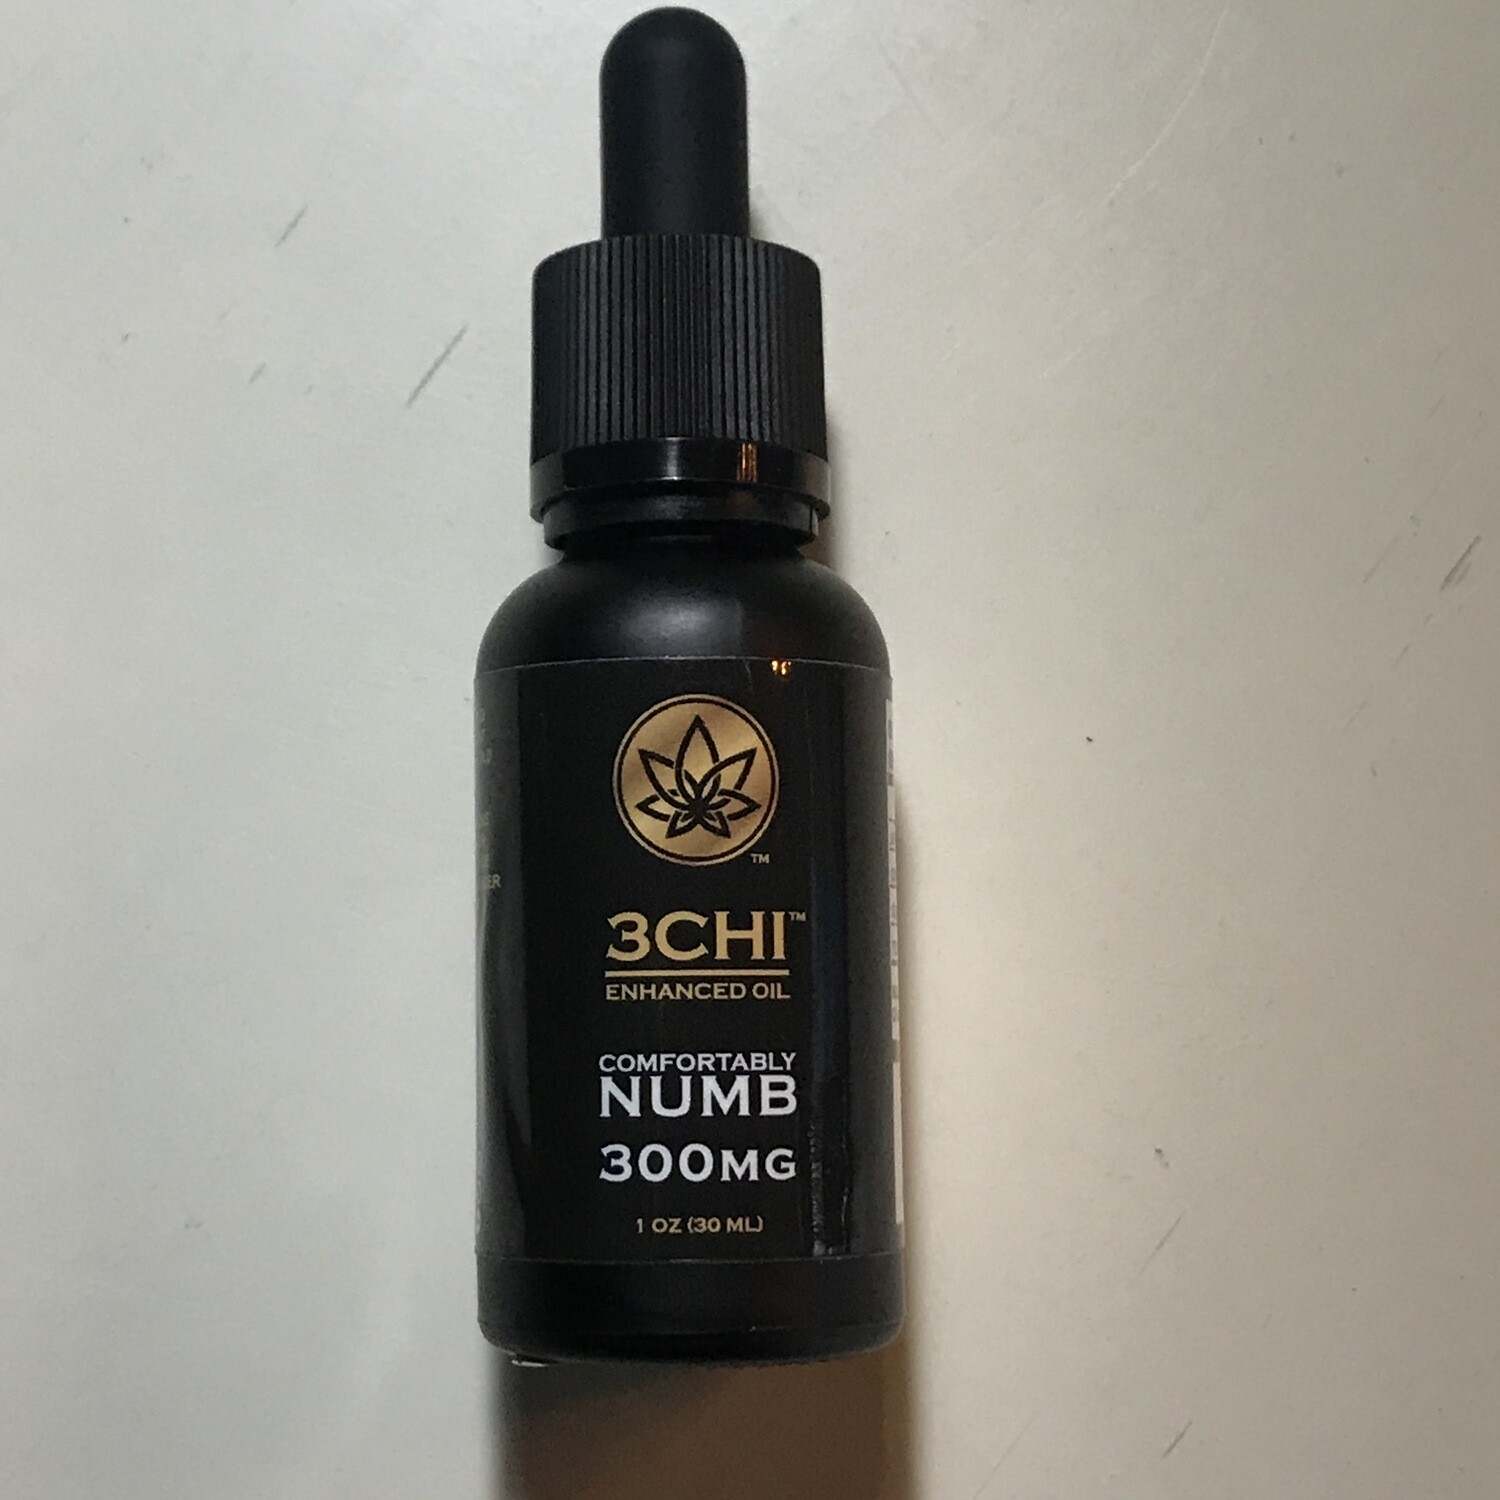 3CHI Comfortably Numb Tincture 300MG 1:1 Delta8 THC, &CBN